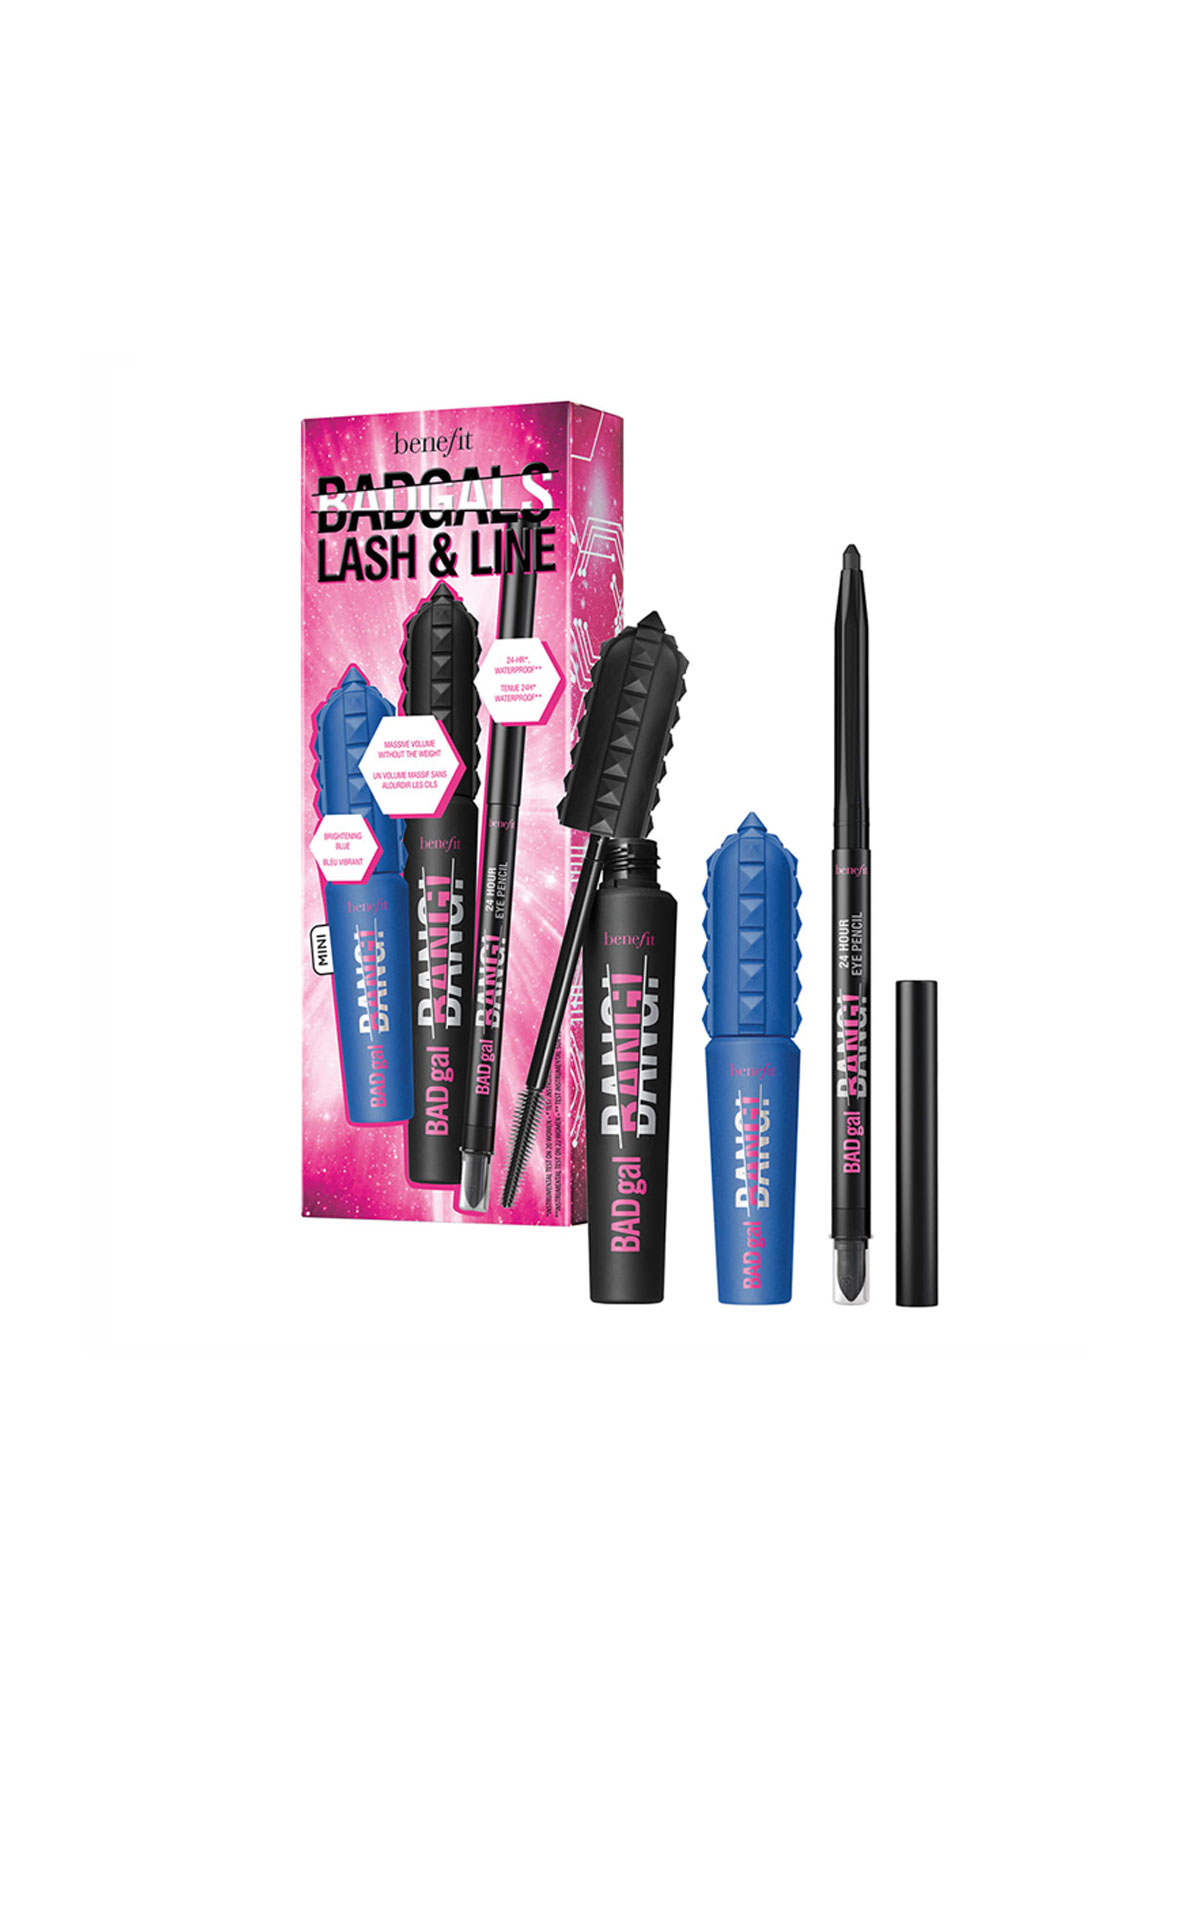 Benefit Cosmetics BADgals lash and line from Bicester Village